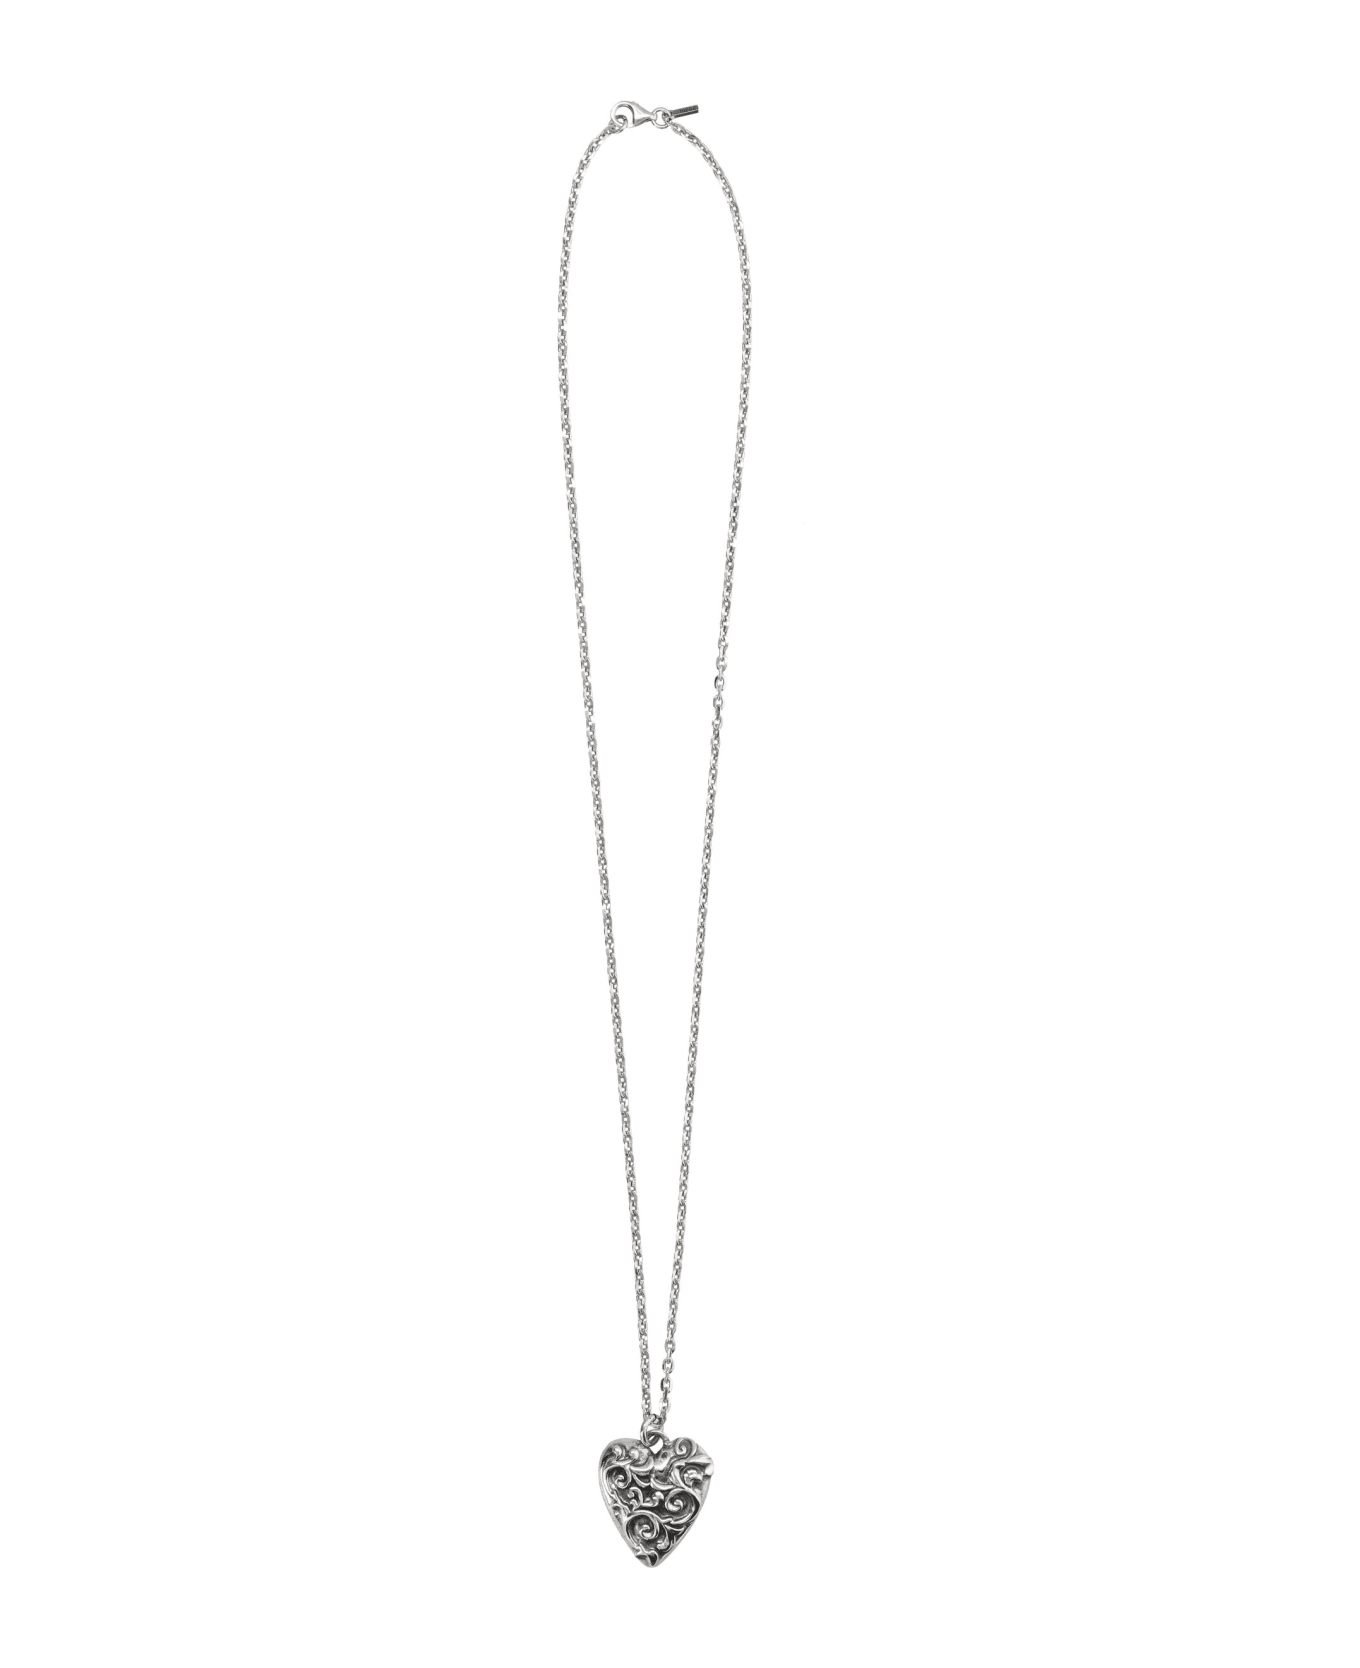 Emanuele Bicocchi Large Heart Necklace - SILVER ネックレス